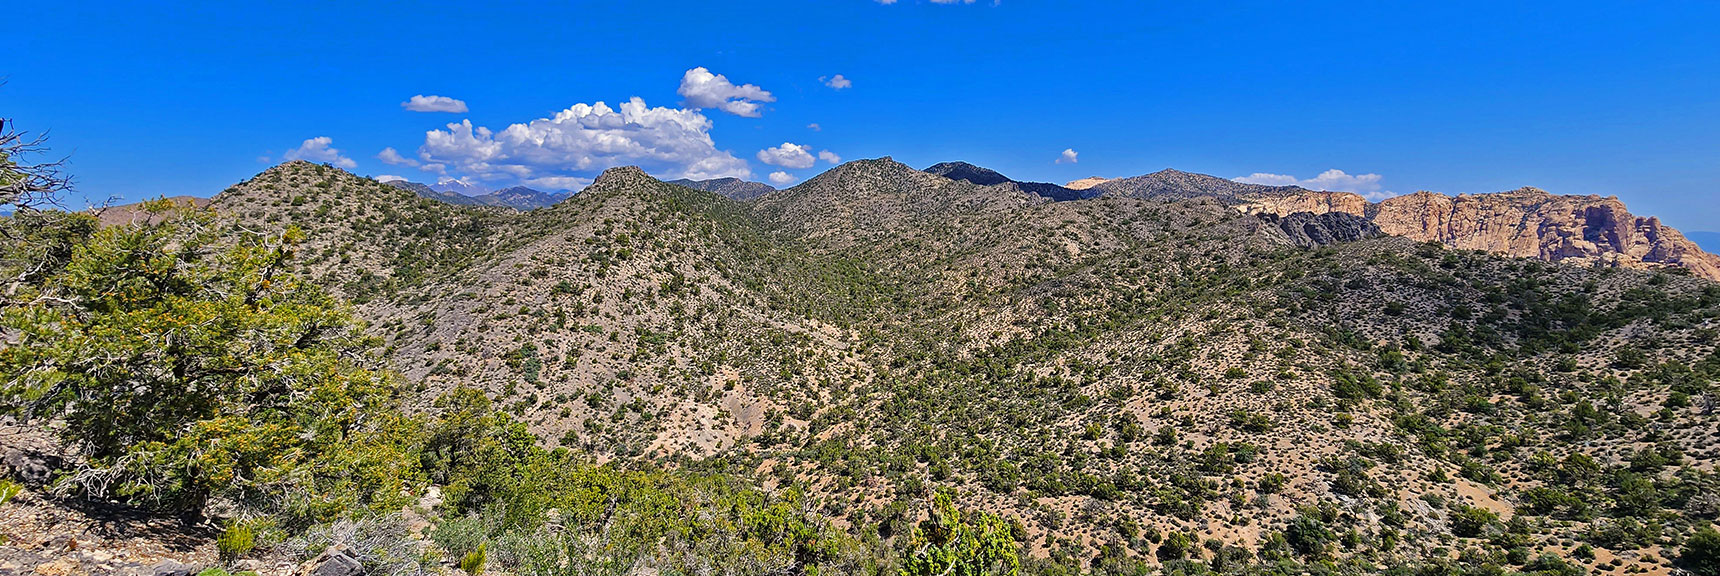 North View While Rounding North Side of Wolverine Ridge. Indecision Peak on Right | Little Zion | Rainbow Mountain Wilderness, Nevada